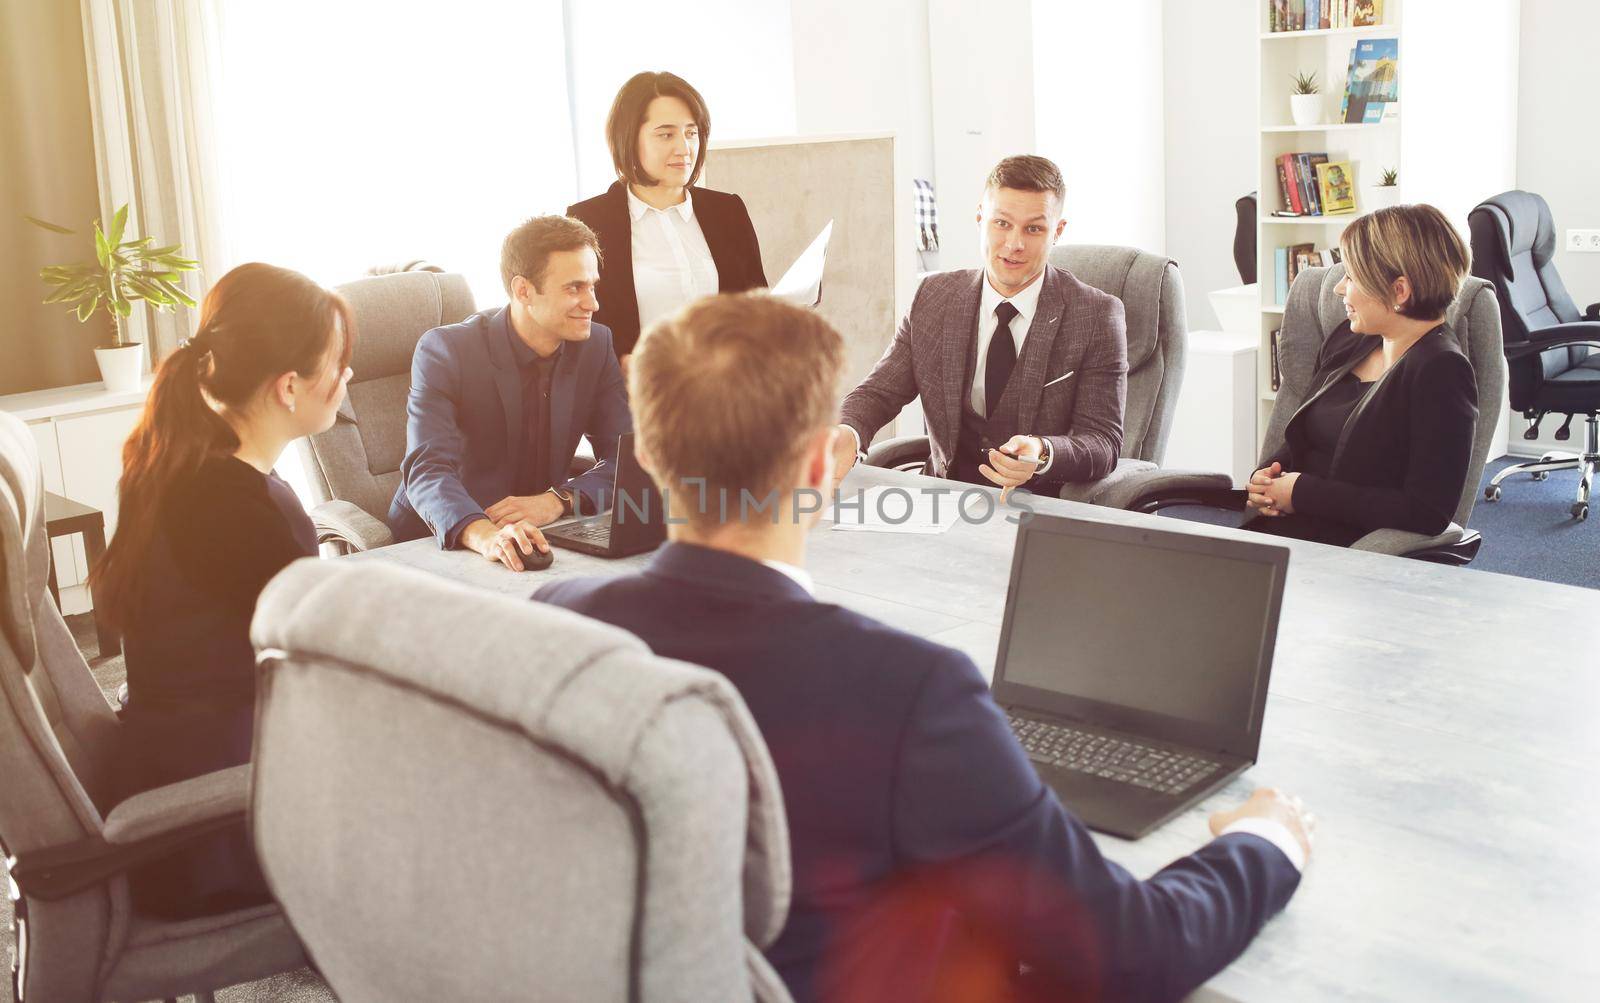 Group of young successful businessmen lawyers communicating together in a conference room while working on a project by selinsmo